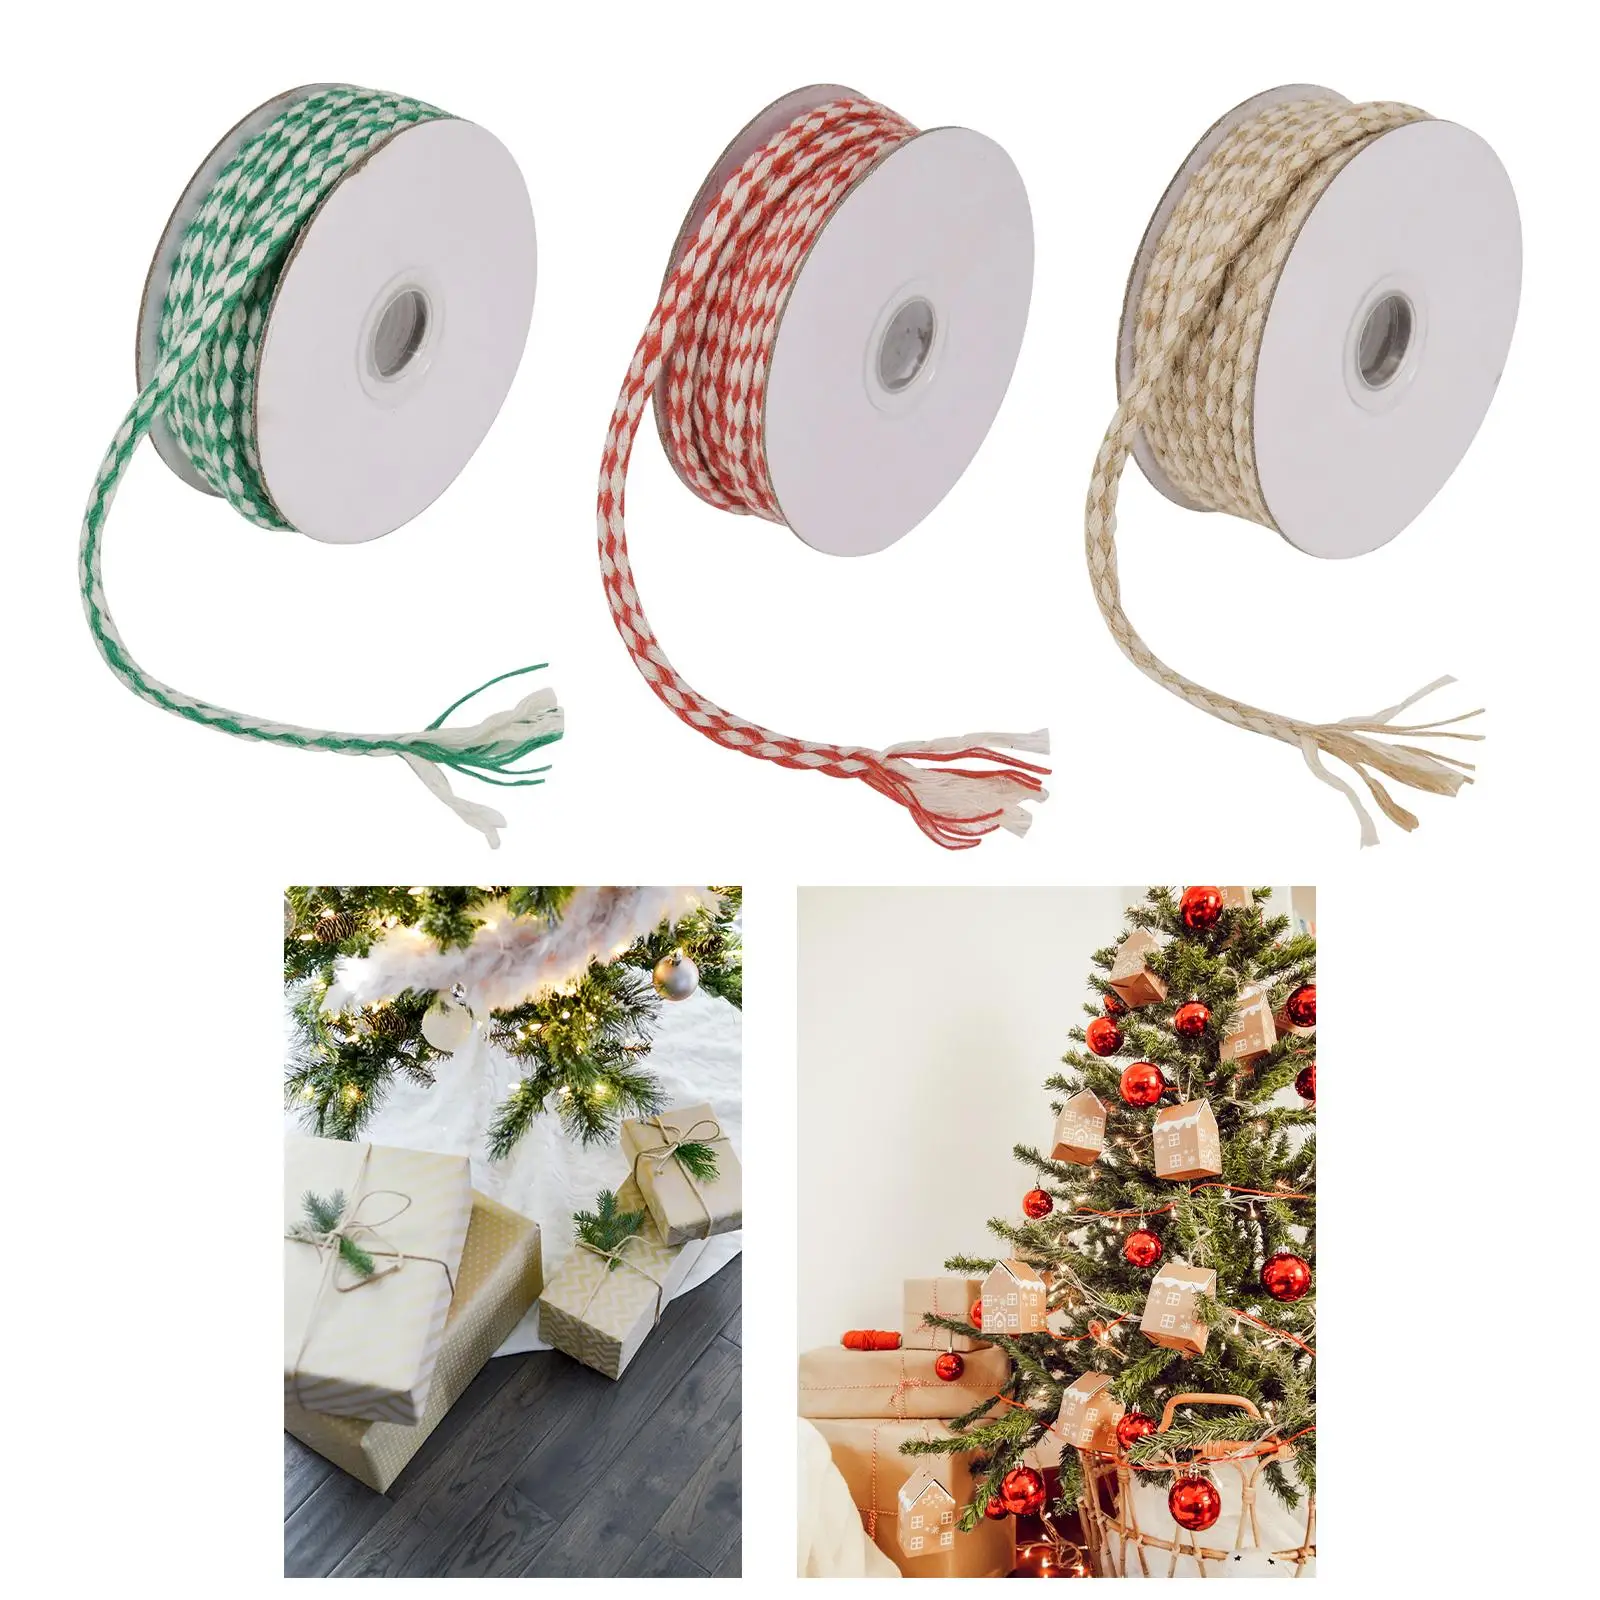 Present Wrapping Cord Crafts 10M Christmas Cotton Twine Roll Decoration